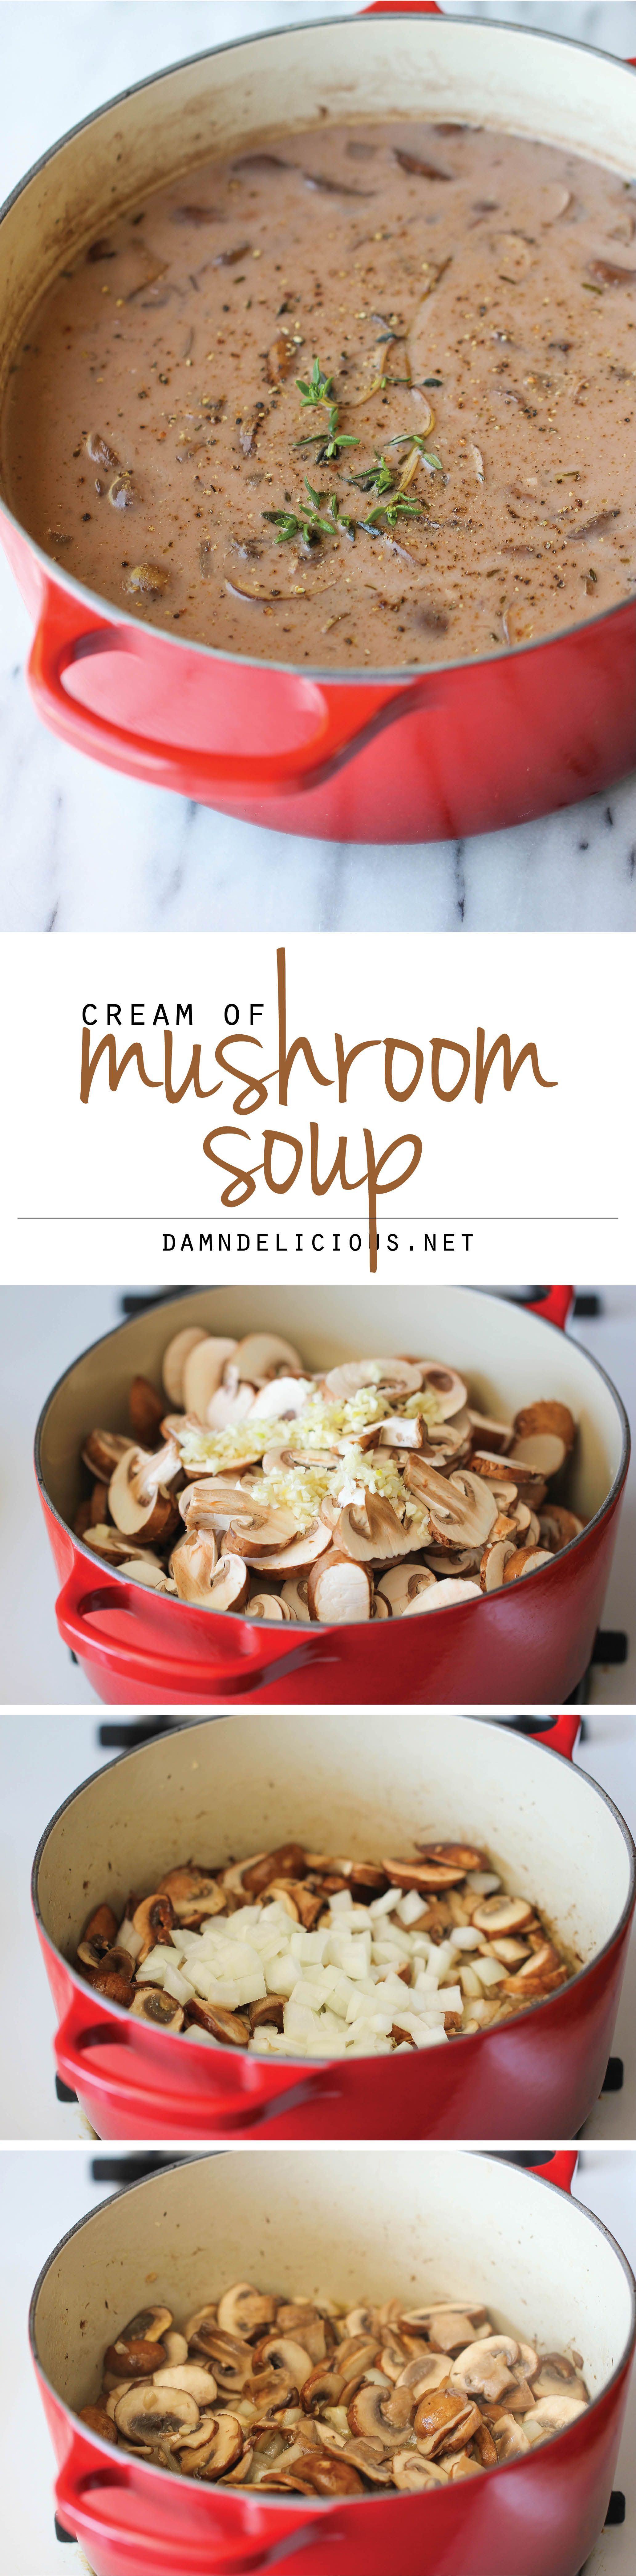 Homemade Cream of Mushroom Soup – The creamiest mushroom soup that tastes like the canned stuff but it’s healthier, creamier and